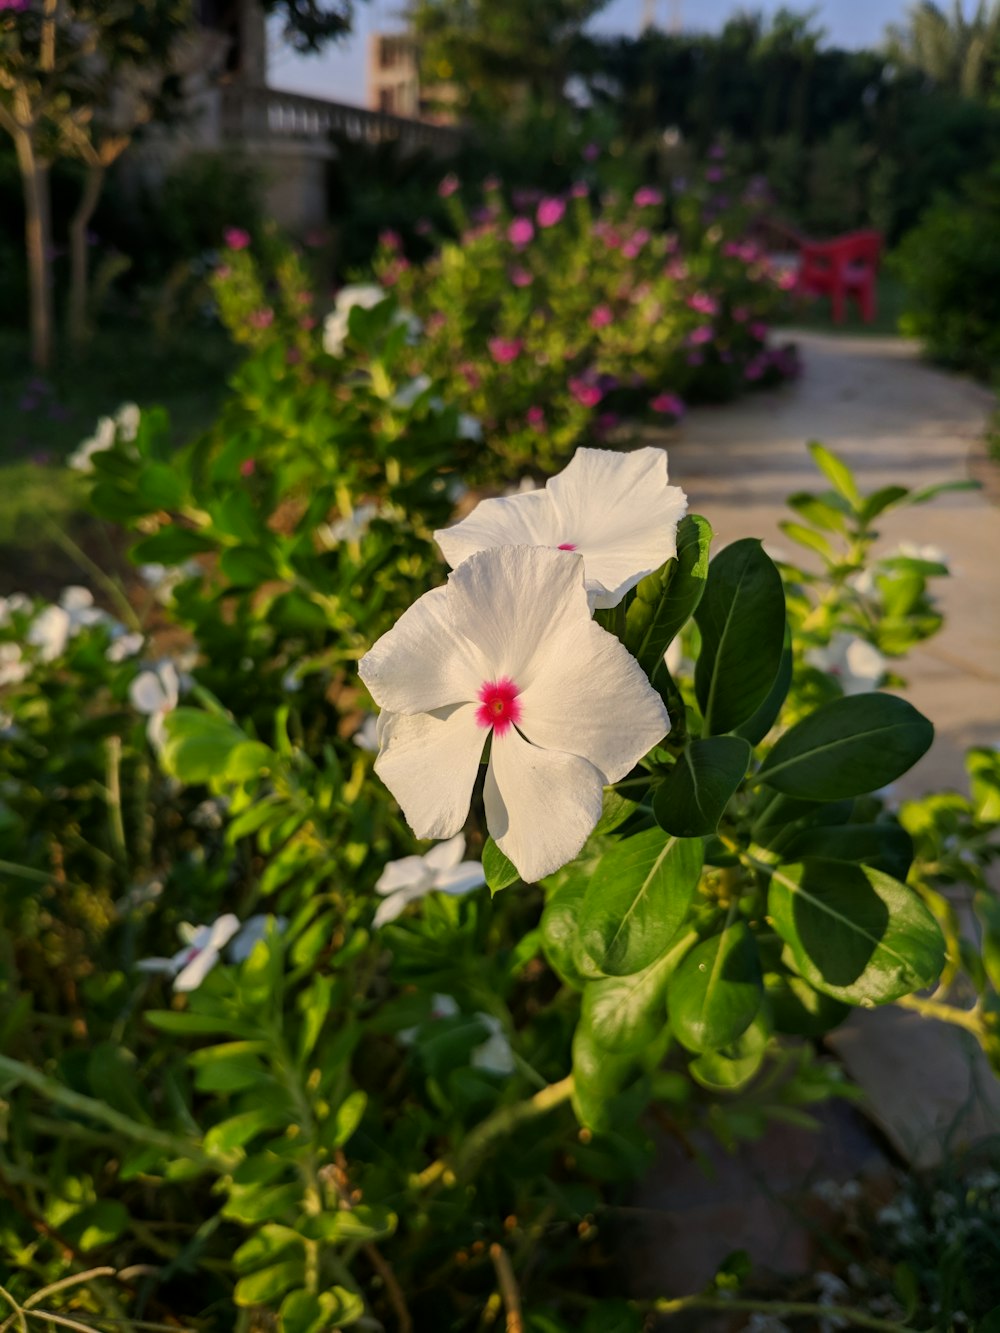 a white flower with a red center in a garden